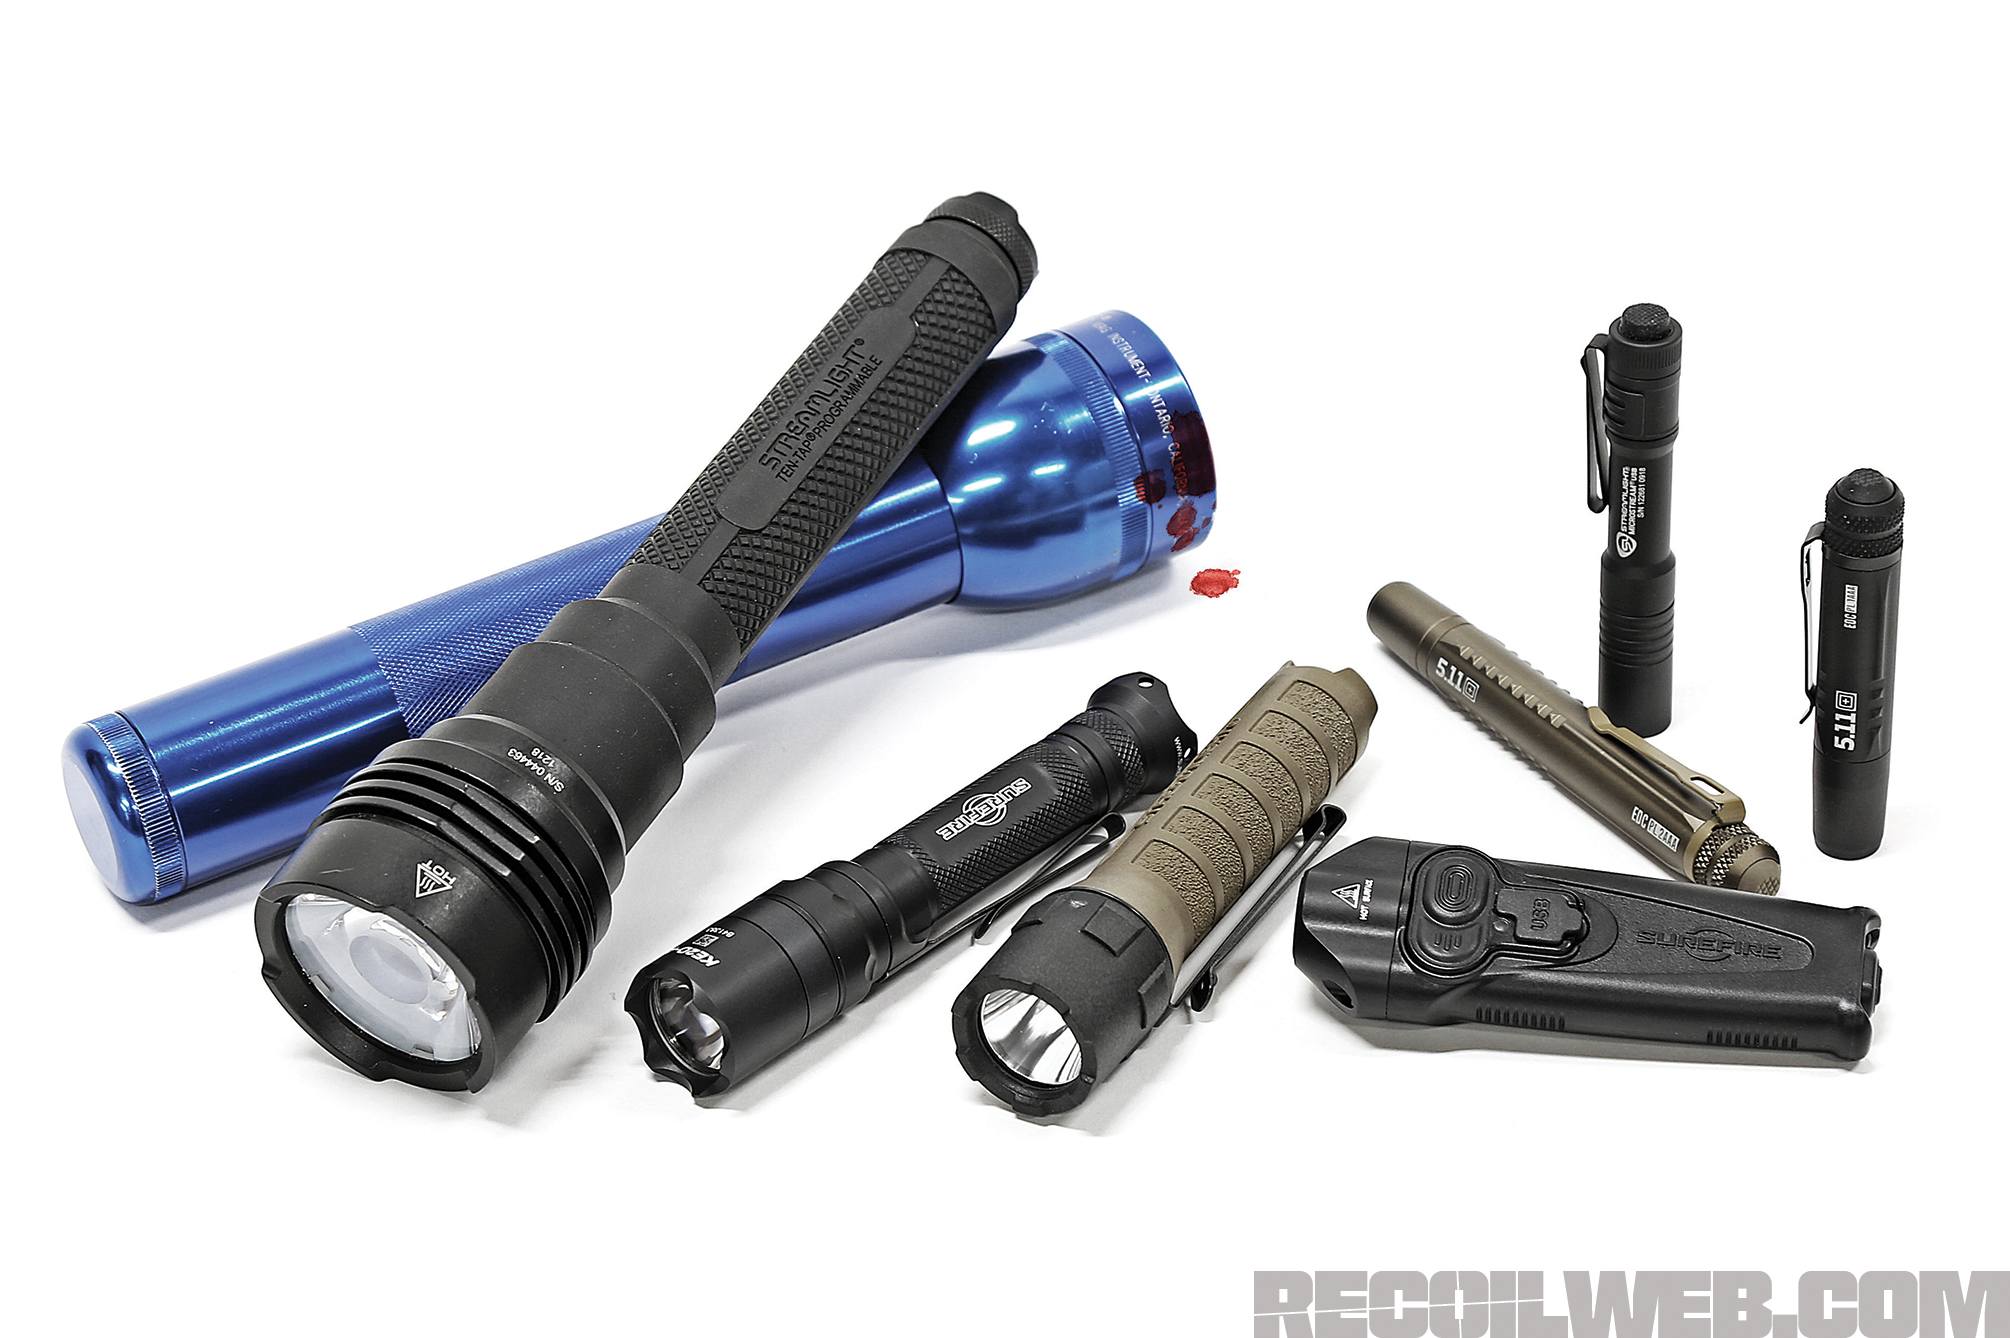 How Many Lumens Does It Take To Blind Someone 10. Conclusion: Choosing the Right Lumens for Self-Defense